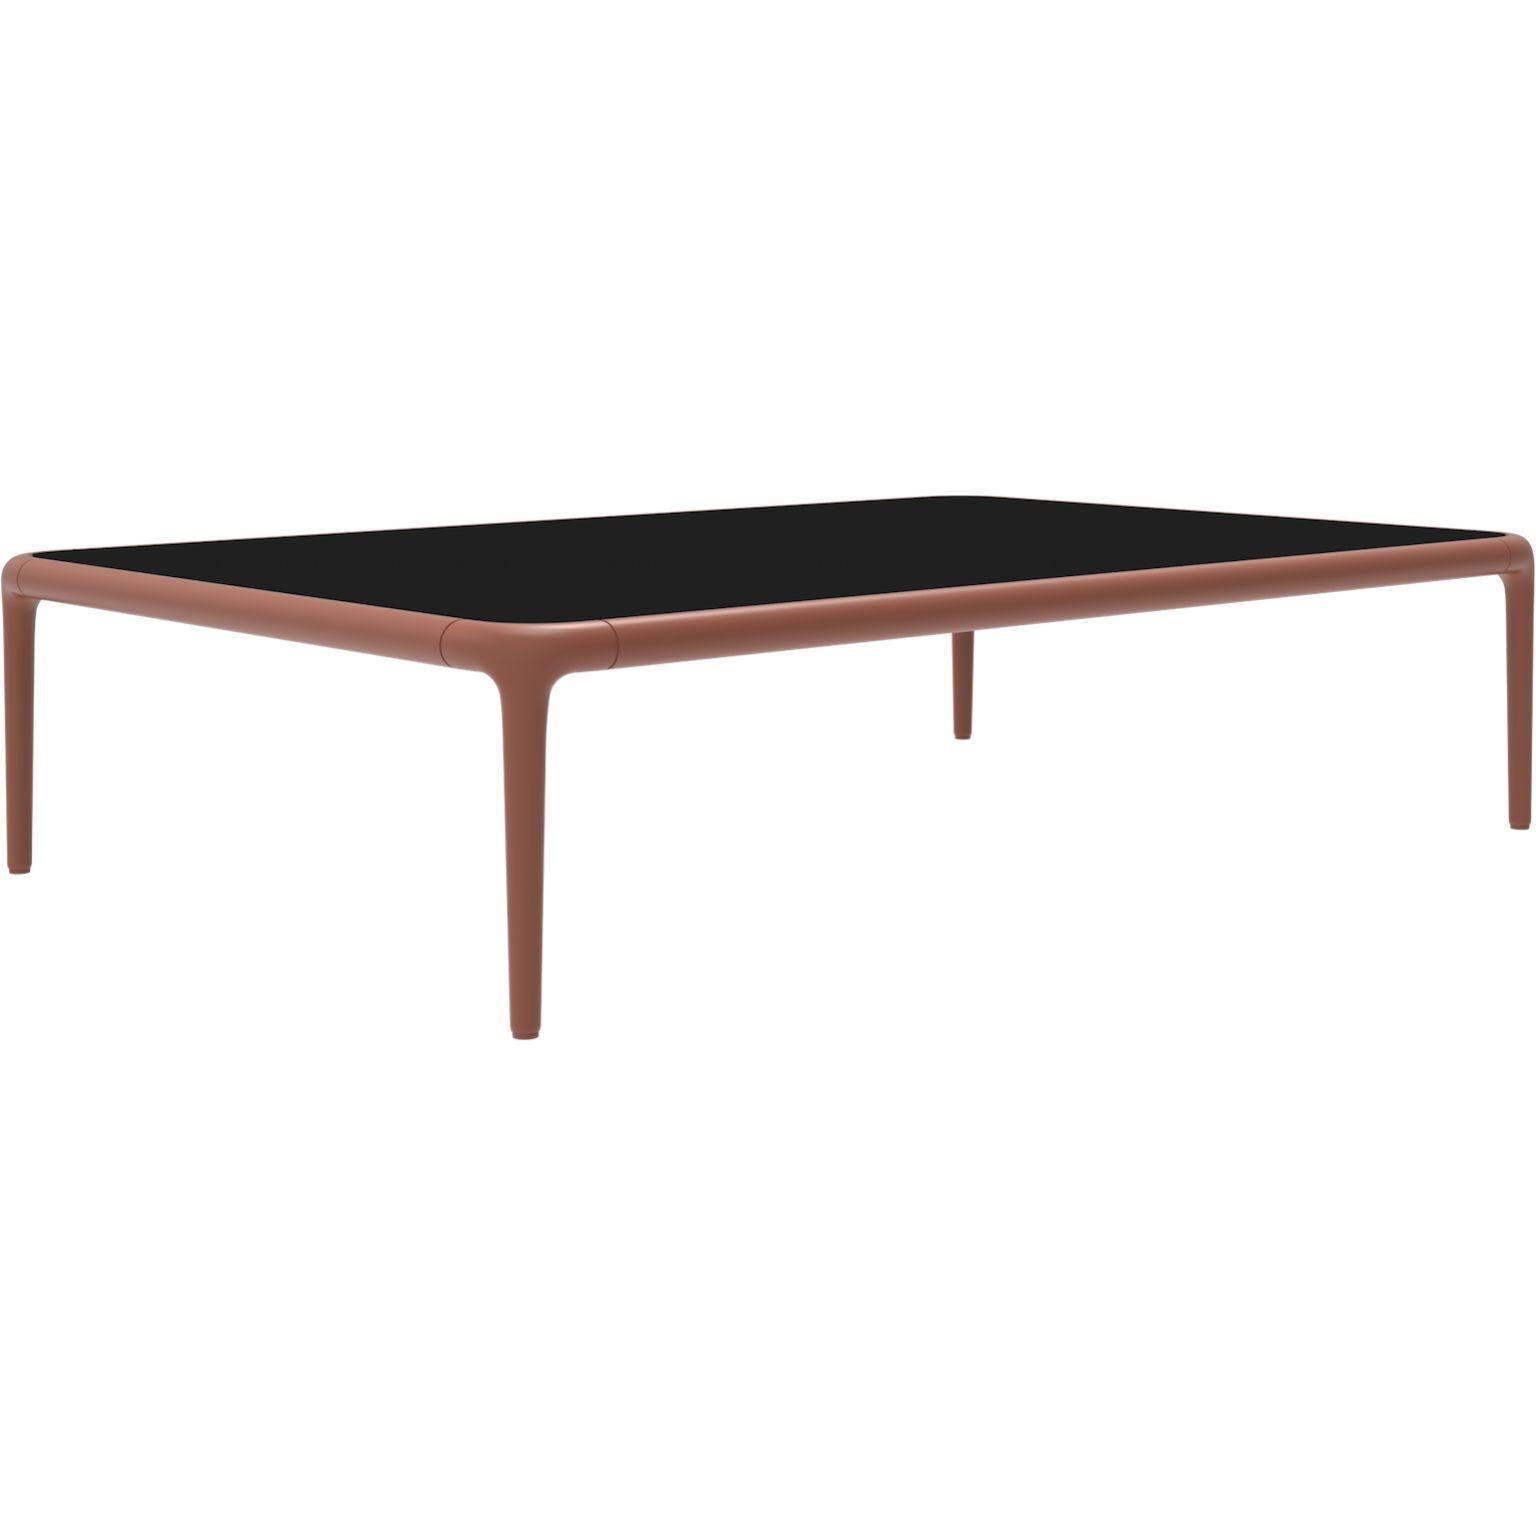 Xaloc Salmon coffee table 120 with glass top by MOWEE
Dimensions: D120 x W80 x H28 cm
Materials: Aluminum, tinted tempered glass top.
Also available in different aluminum colors and finishes (HPL Black Edge or Neolith). 

Xaloc synthesizes the